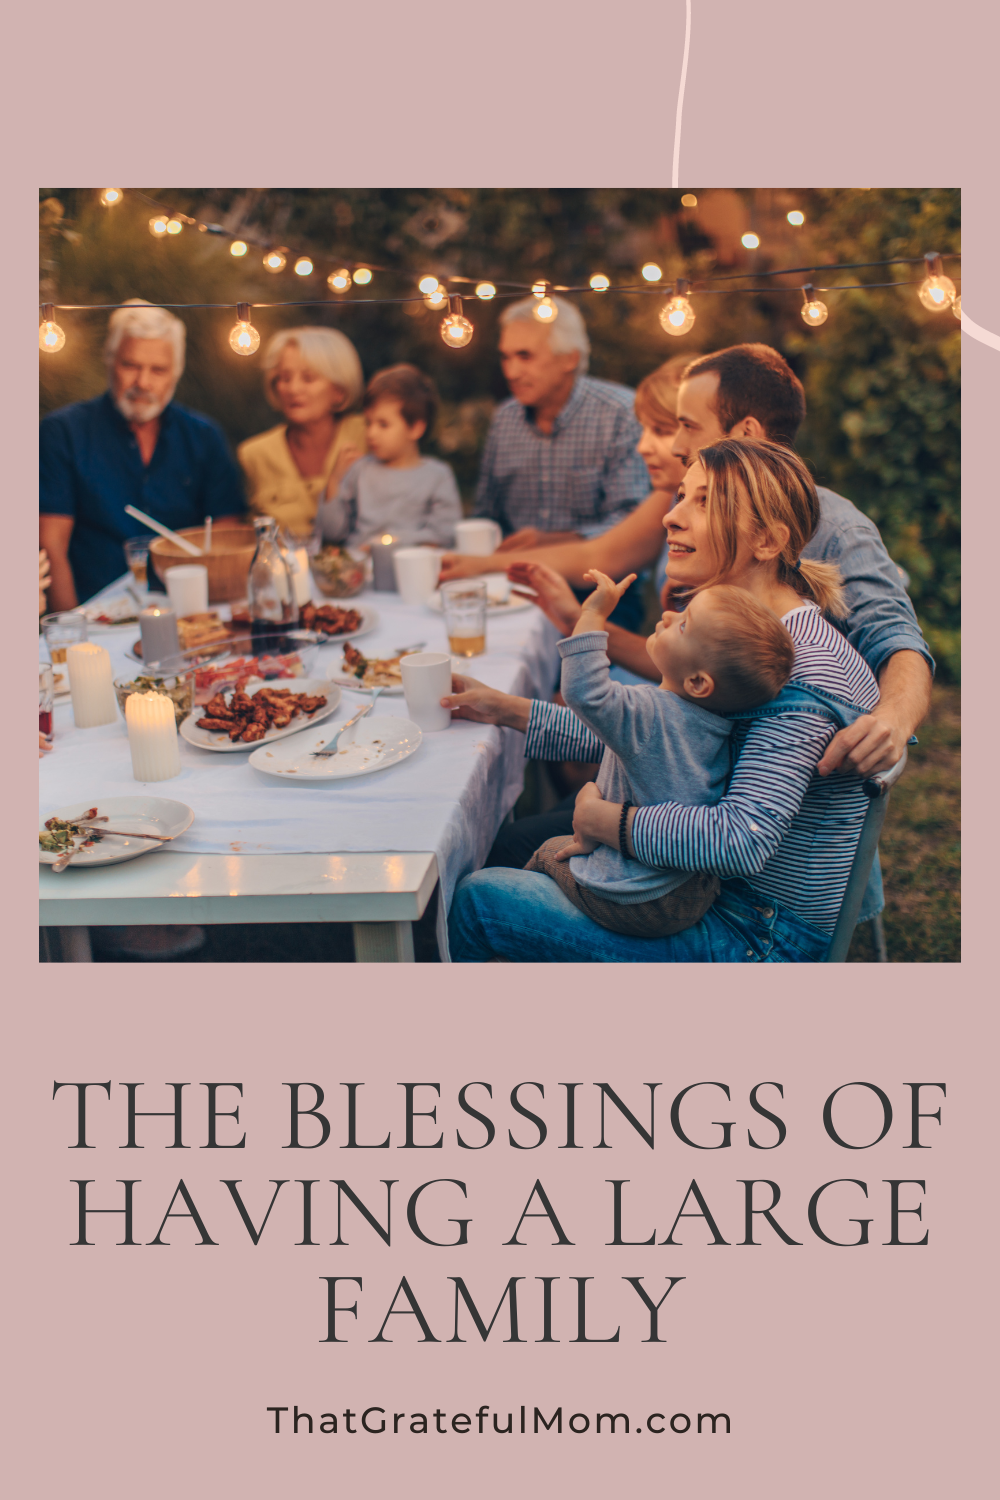 The many blessings of having a large family and why we chose to have one.